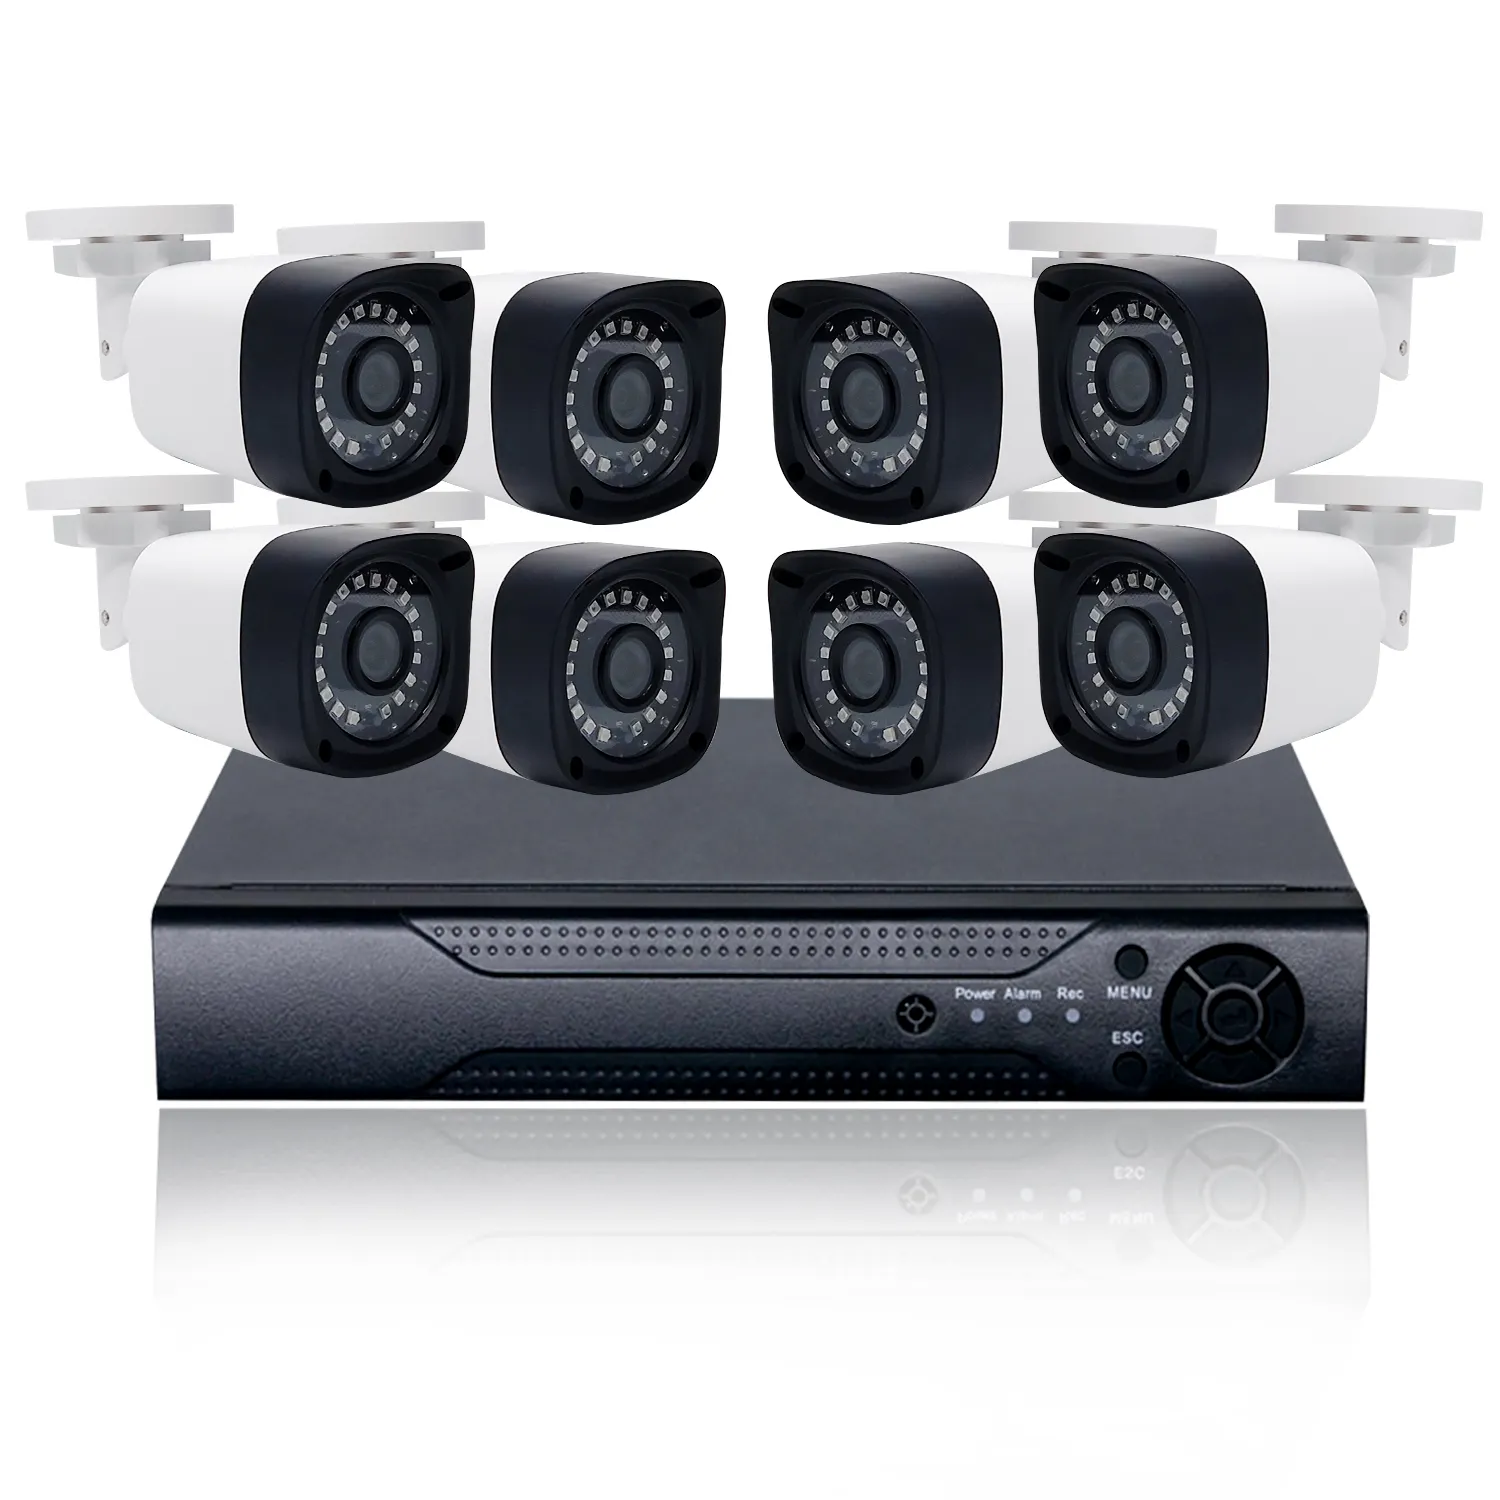 WESECUU best selling 2MP 5MP 8MP DVR surveillance system dvr 8 channel cctv system camera security camera AHD analog camera